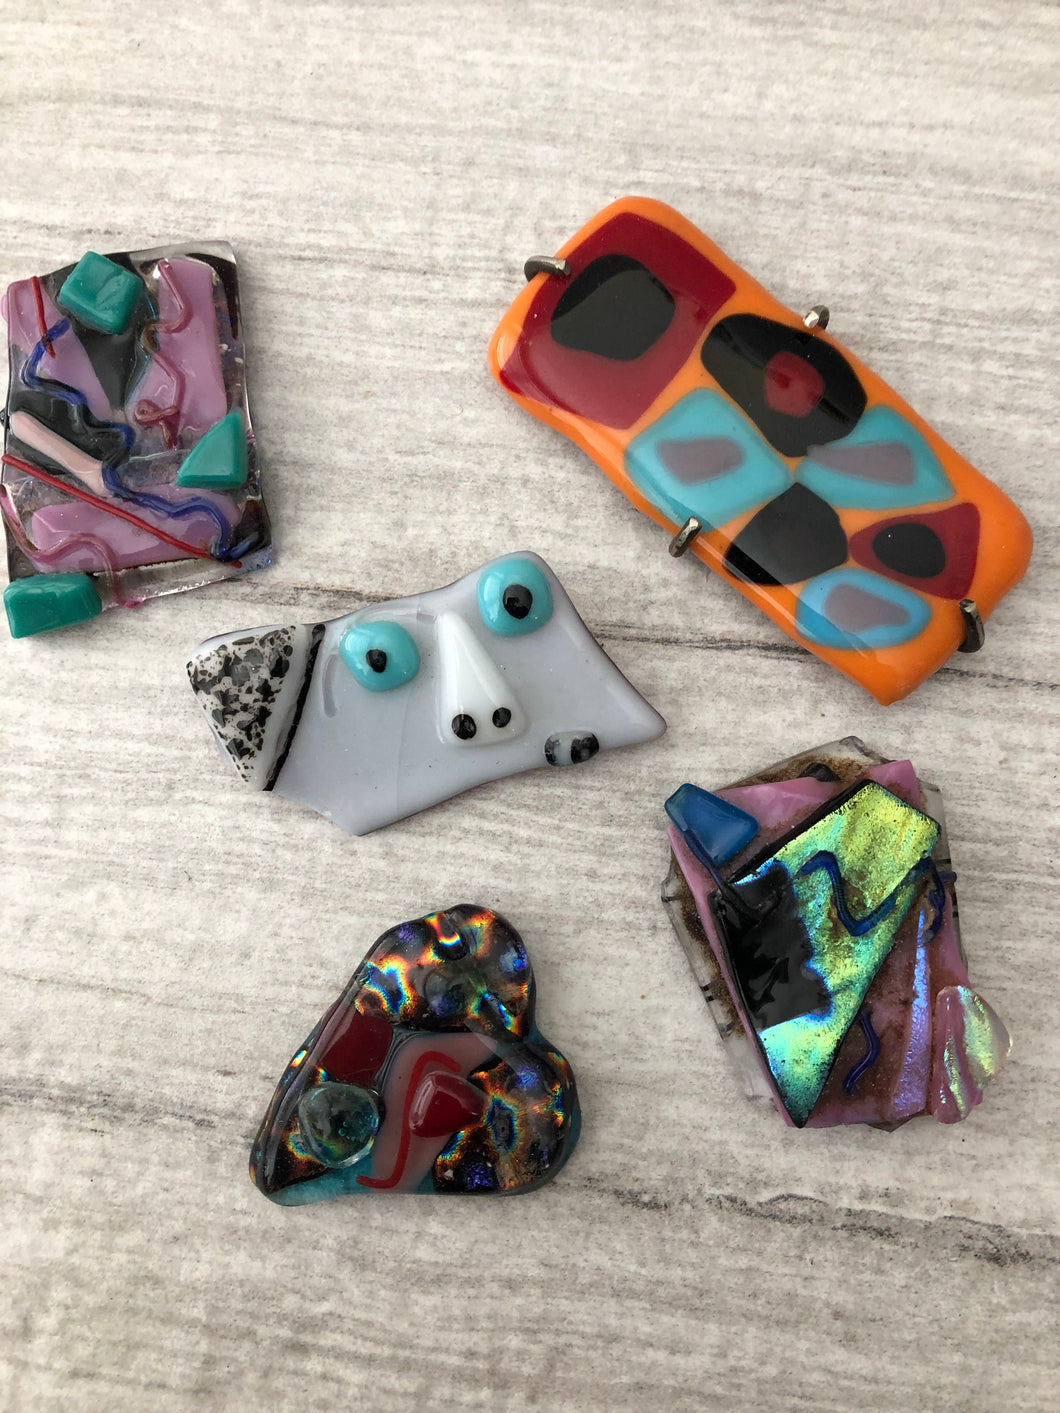 Fused Glass- June 8th 1-3pm- $45